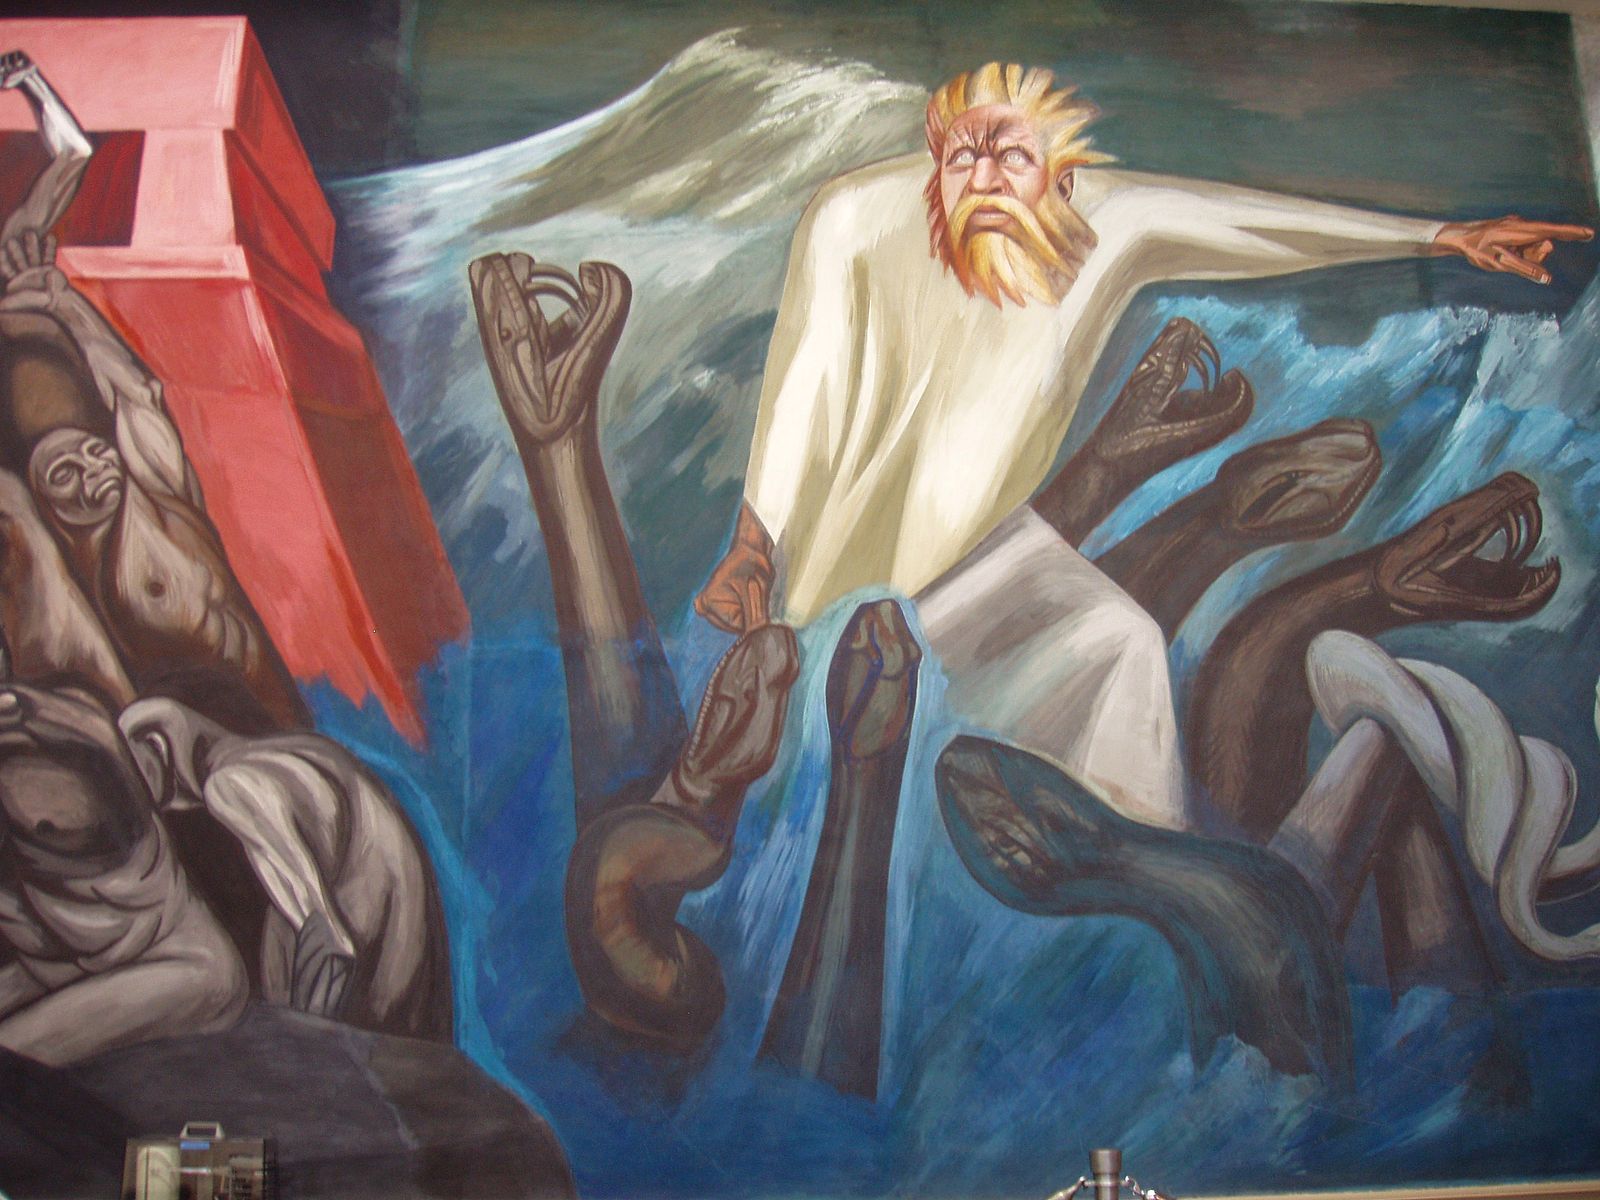 A mural with a large man in white surrounded by snake heads and people fleeing